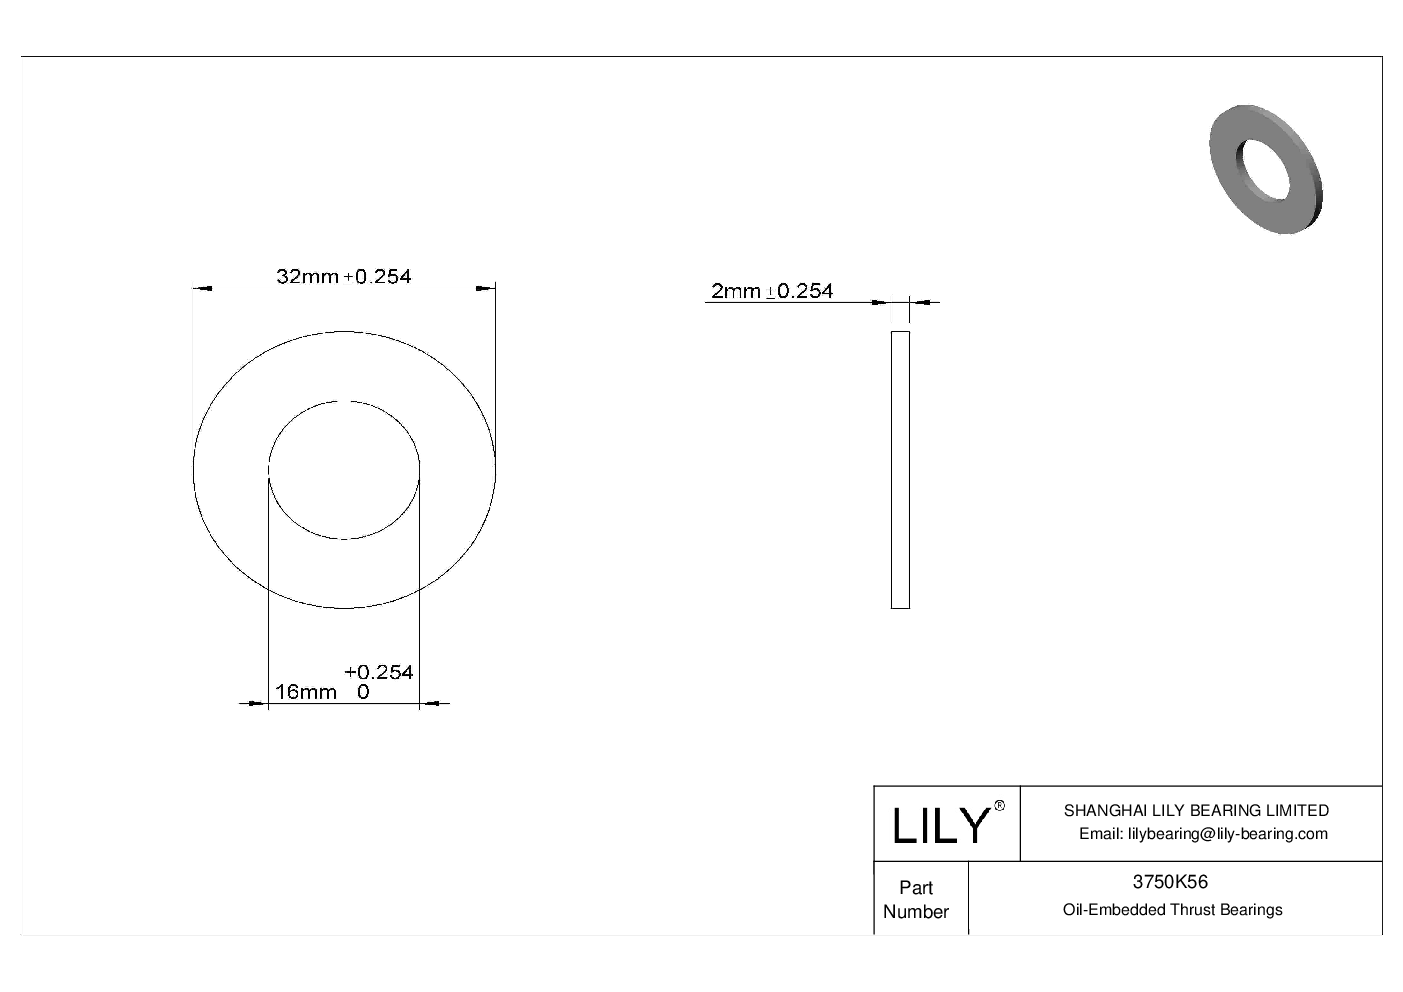 DHFAKFG High-Load Oil-Embedded Thrust Bearings cad drawing